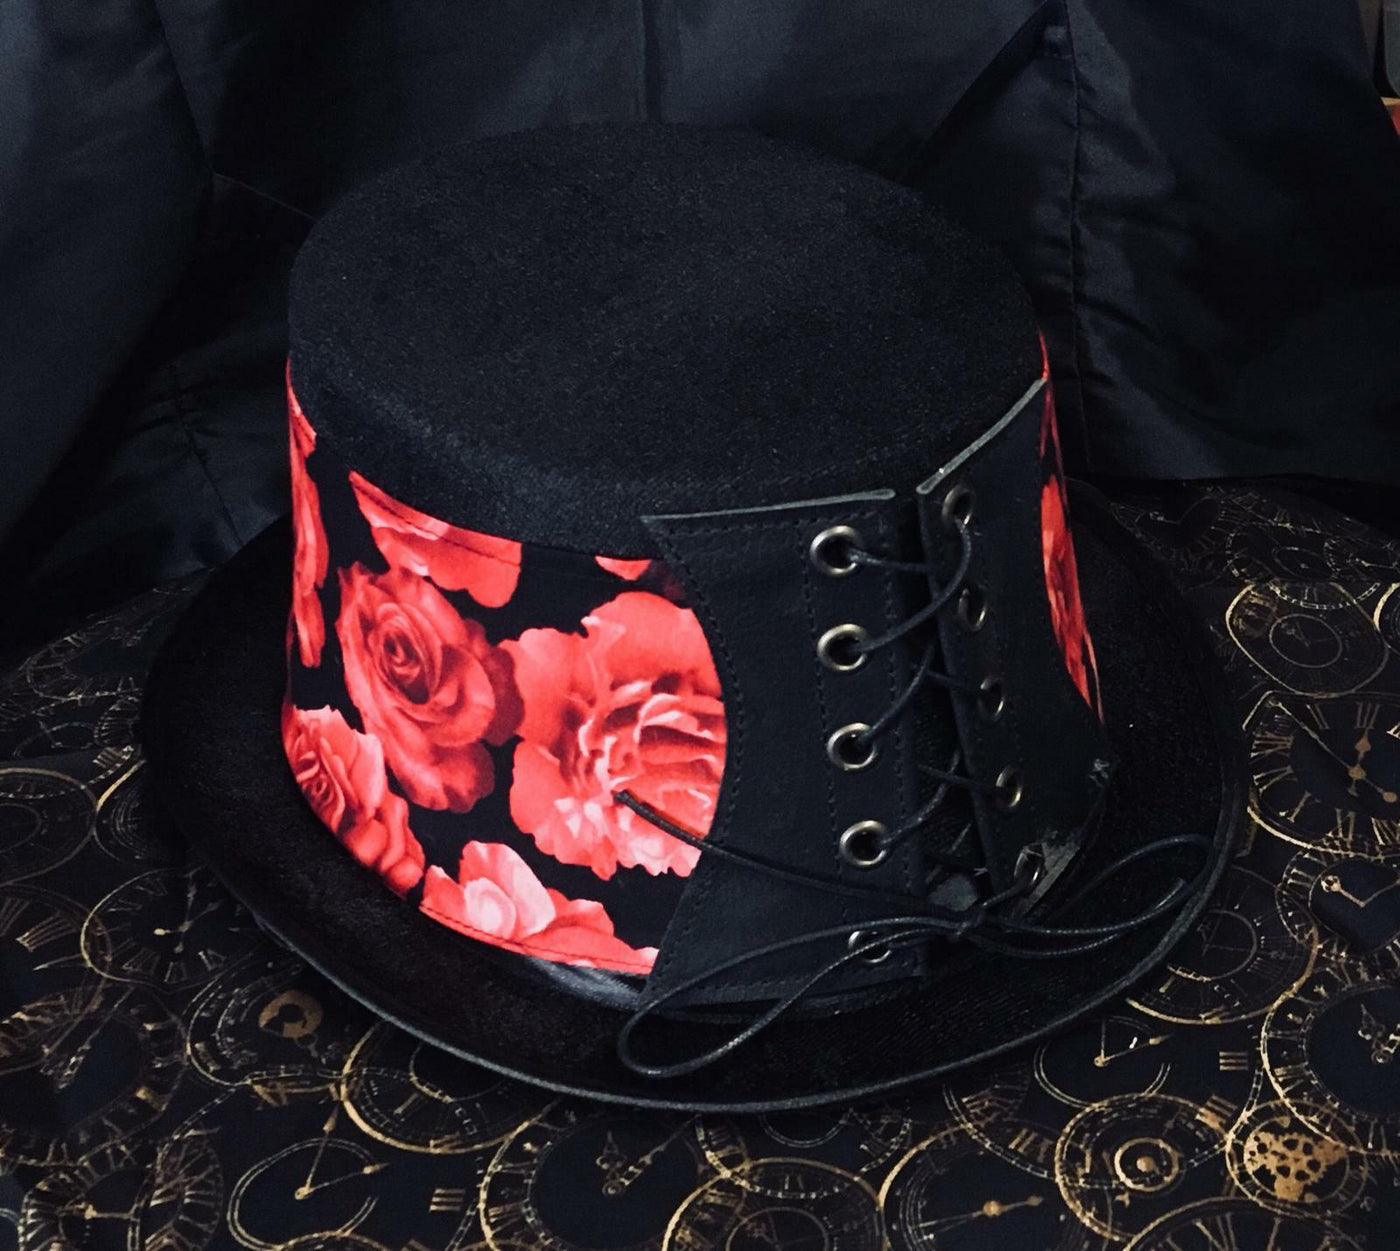 Top Hat Red Roses Flowers Floral Corset Biker Gothic Steampunk Rock feeanddave